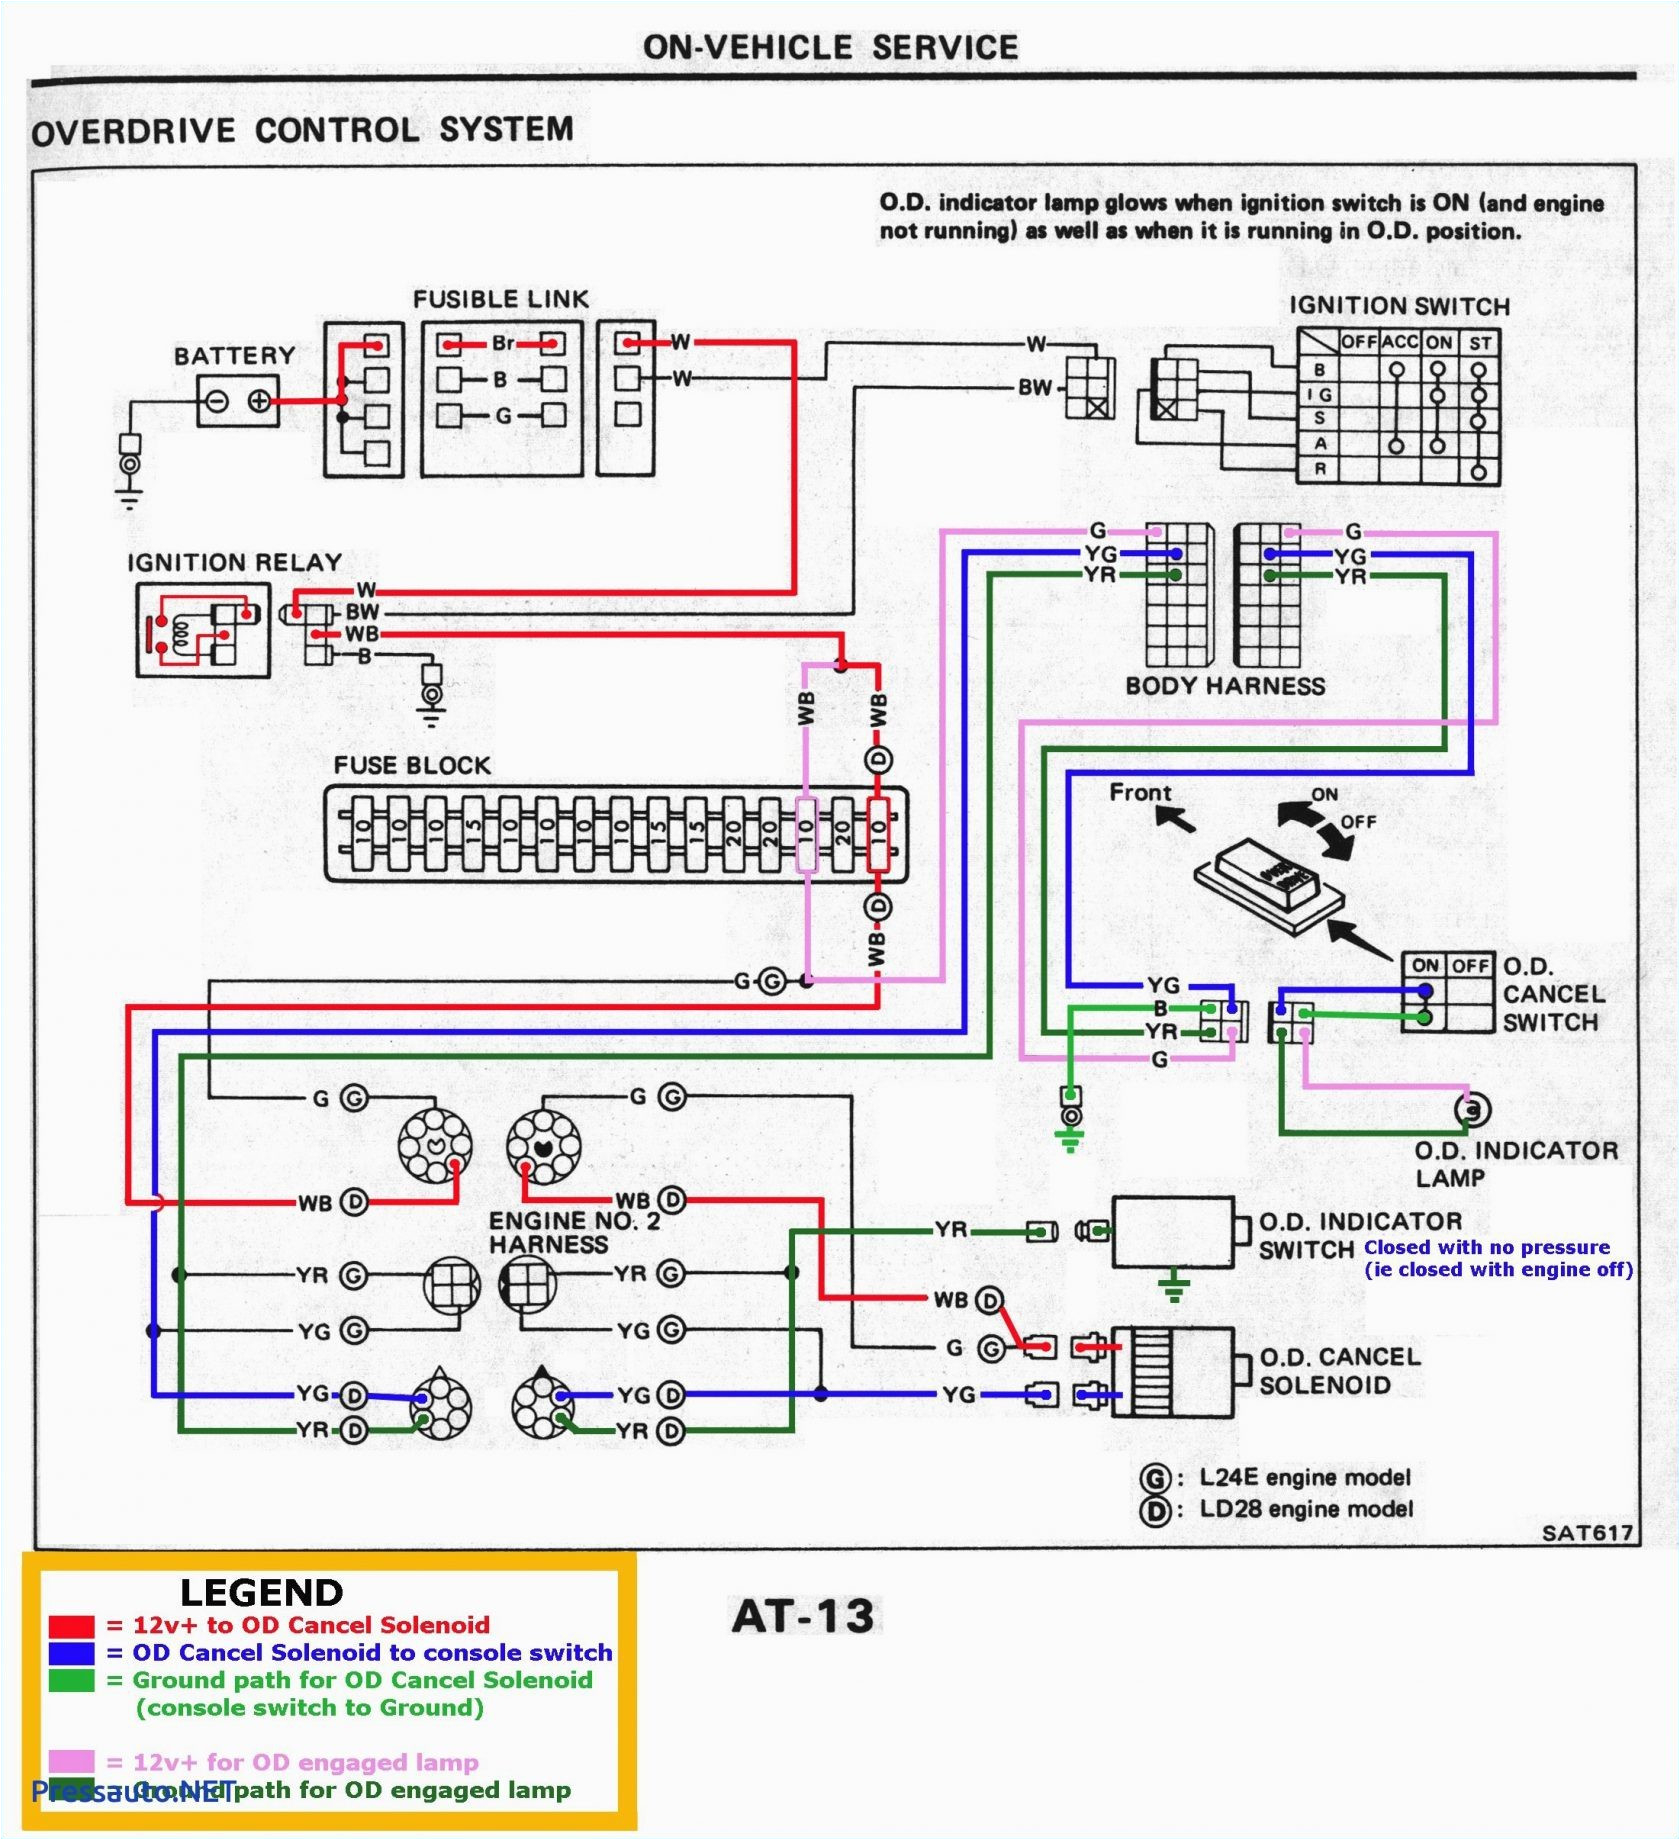 pin ethernet wiring standard pin out on pinterest wiring diagram blog pin out wiring diagram